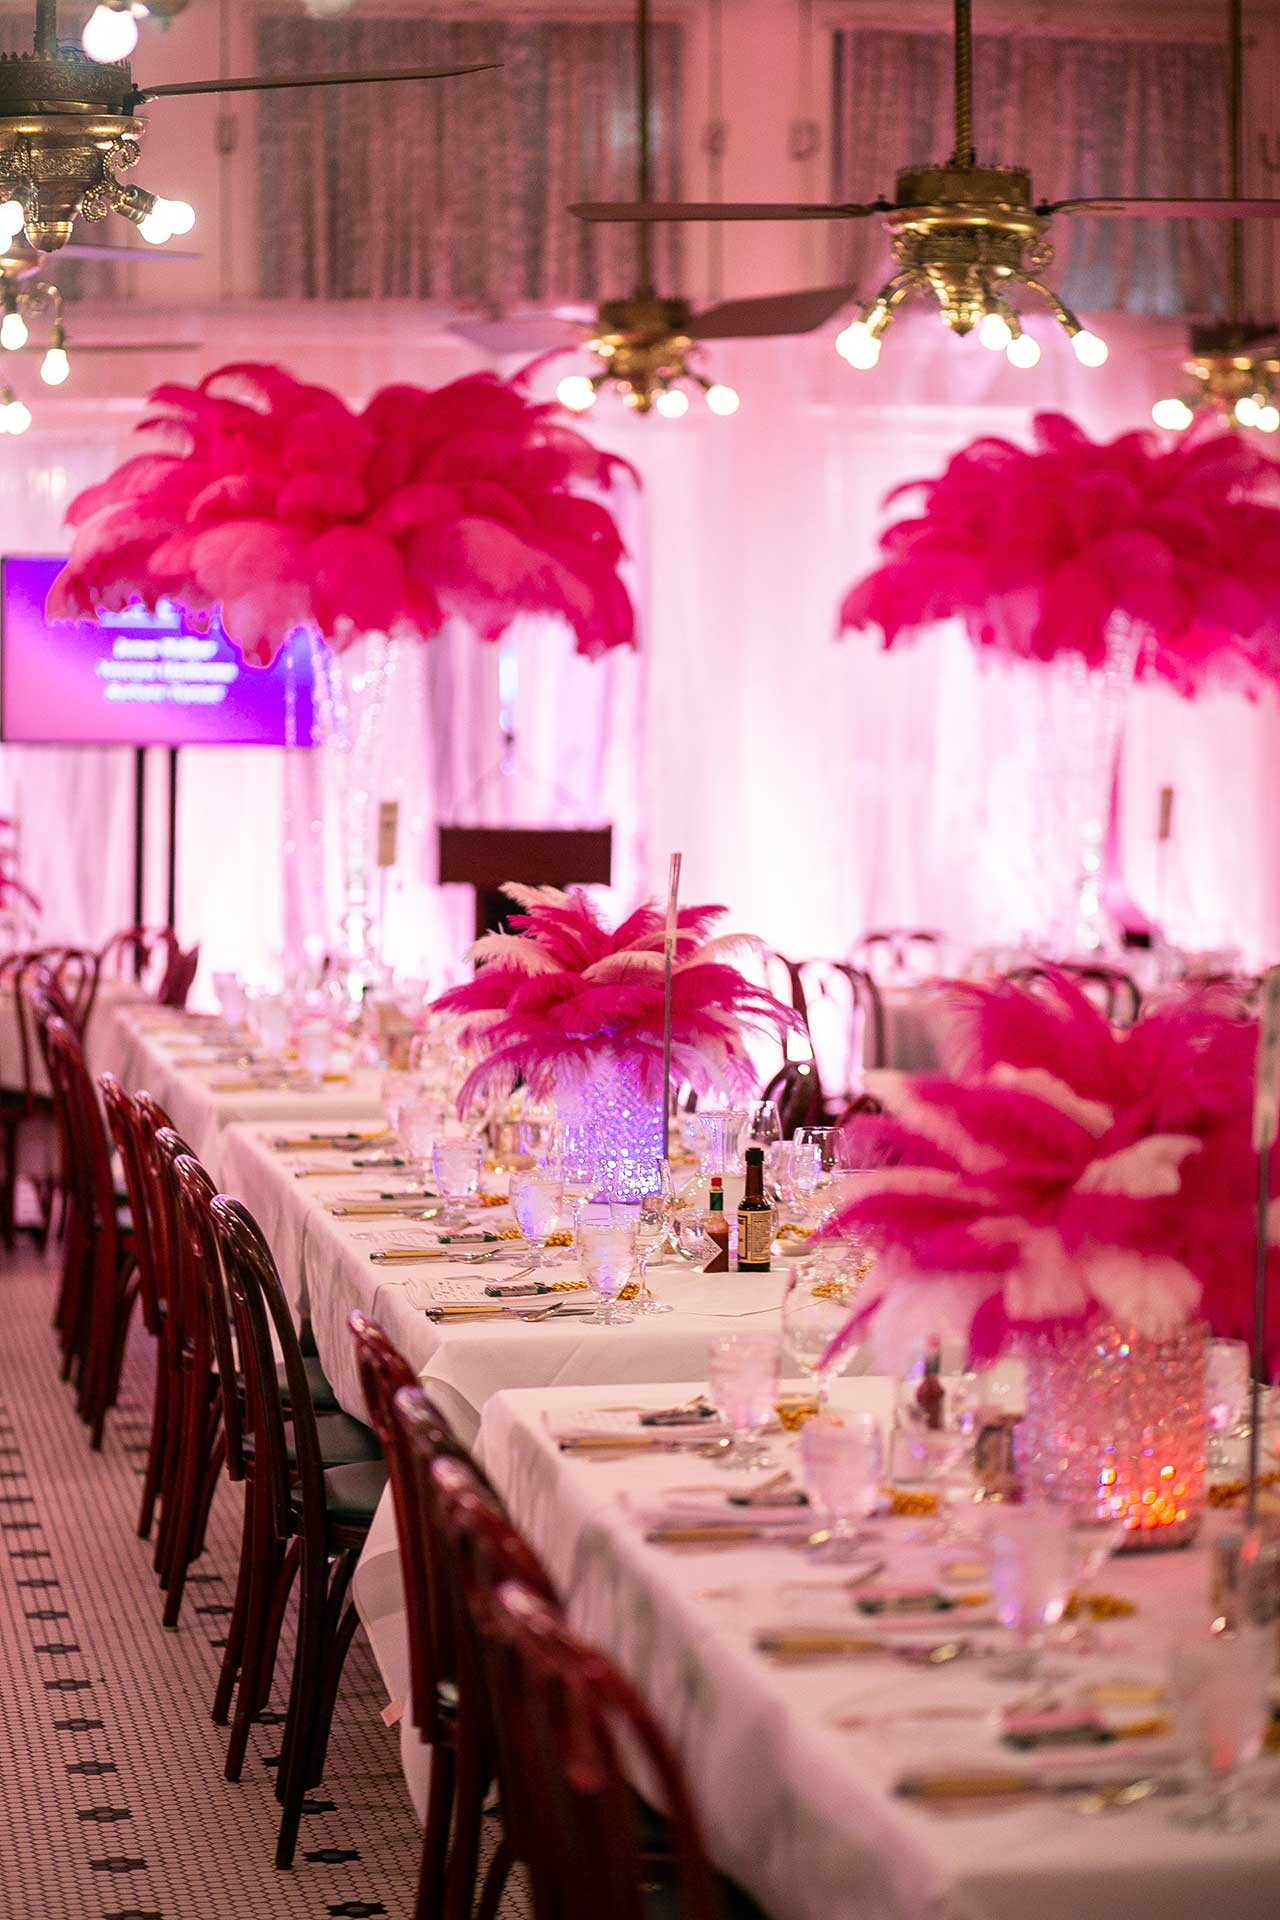 galatories goes pink, charity, nocci, event, event planning, event coordinating, event management, event logistics, event marketing, conferences, workshops, seminars, meetings, festivals